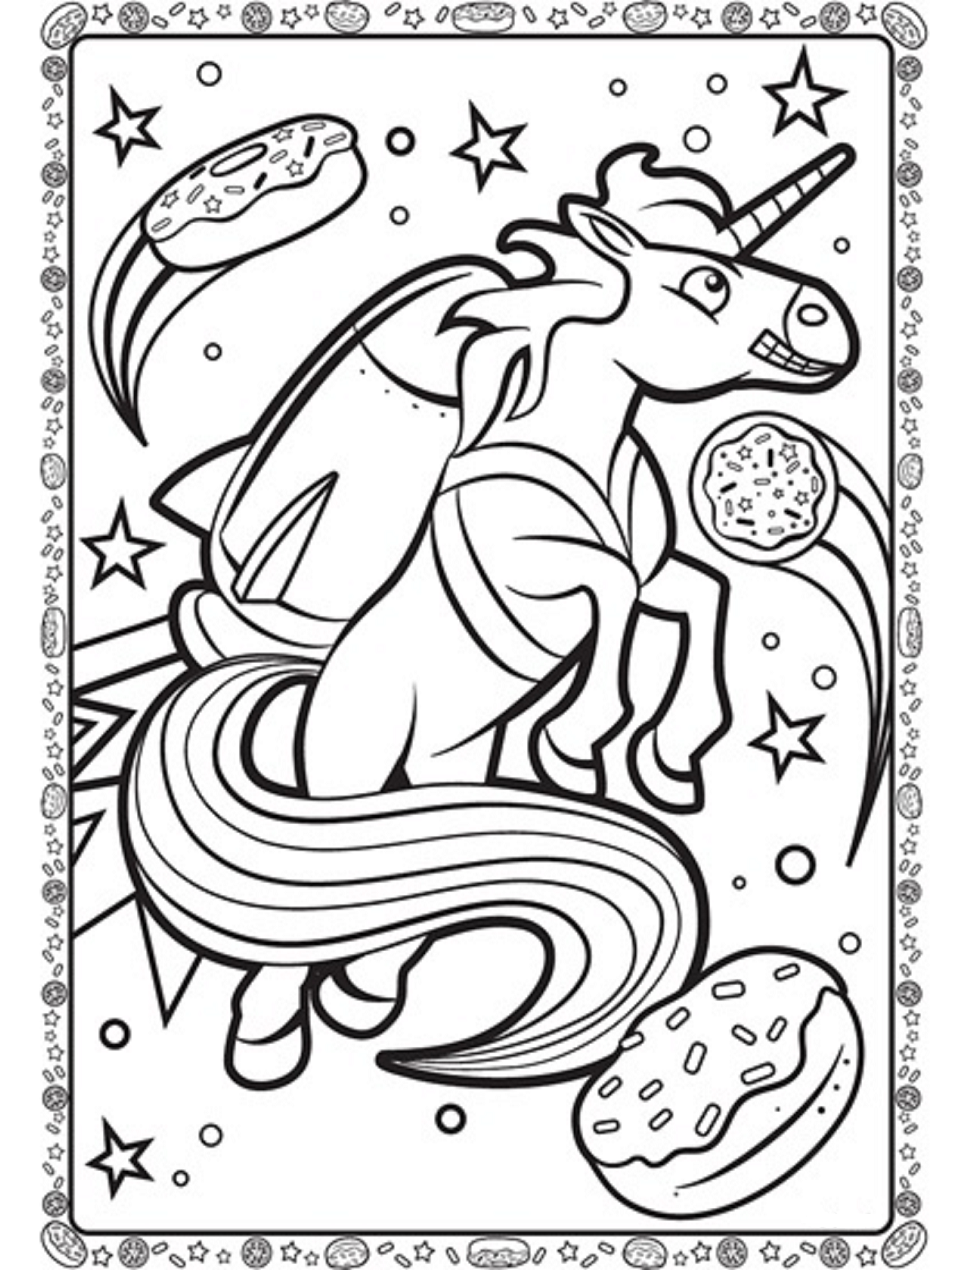 Unicorn With Rocket Coloring Page   Free Printable Coloring Pages ...